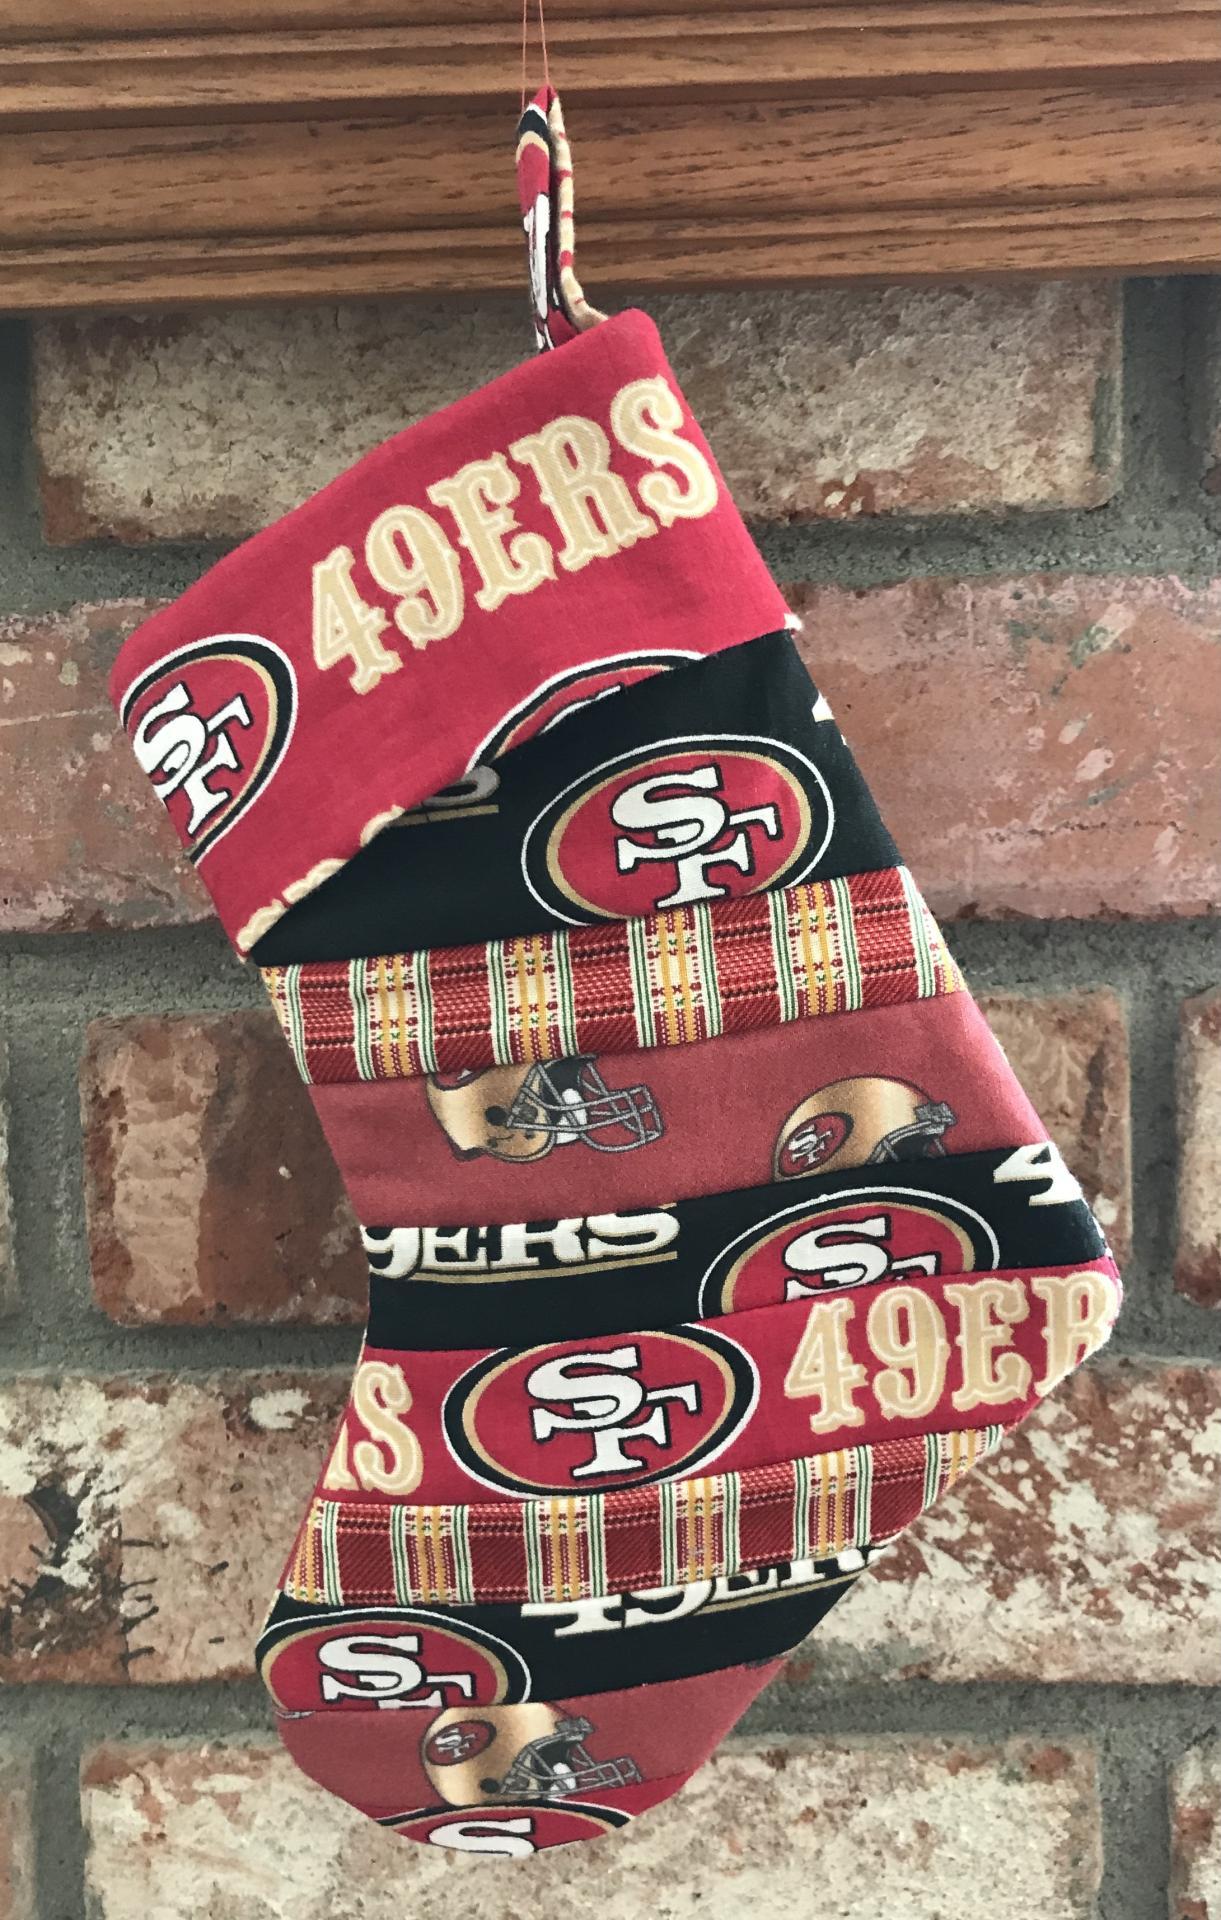 Small 9" SF 49ers Christmas Stocking, Quilted Niners Christmas Stocking, San Francisco 49ers Christmas Stocking, football, handmade 